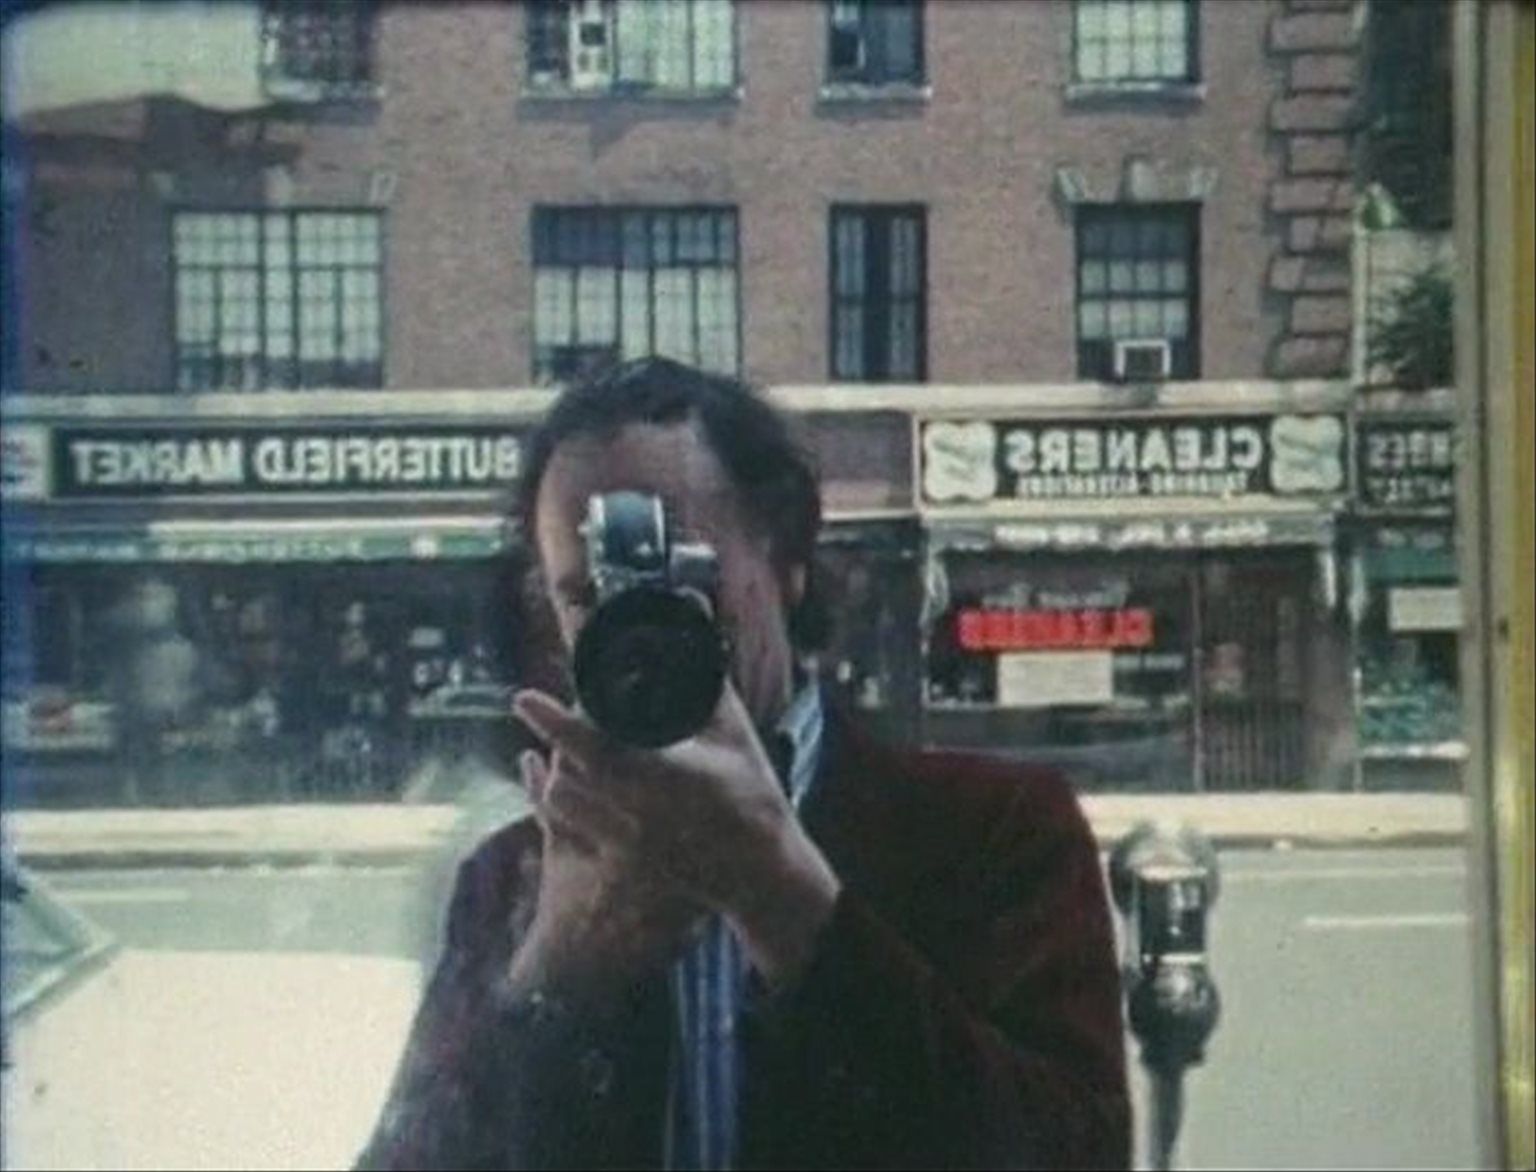 Still from film "As I Was Moving Ahead Occasionally I Saw Brief Glimpses of Beauty" (2000) by Jonas Mekas